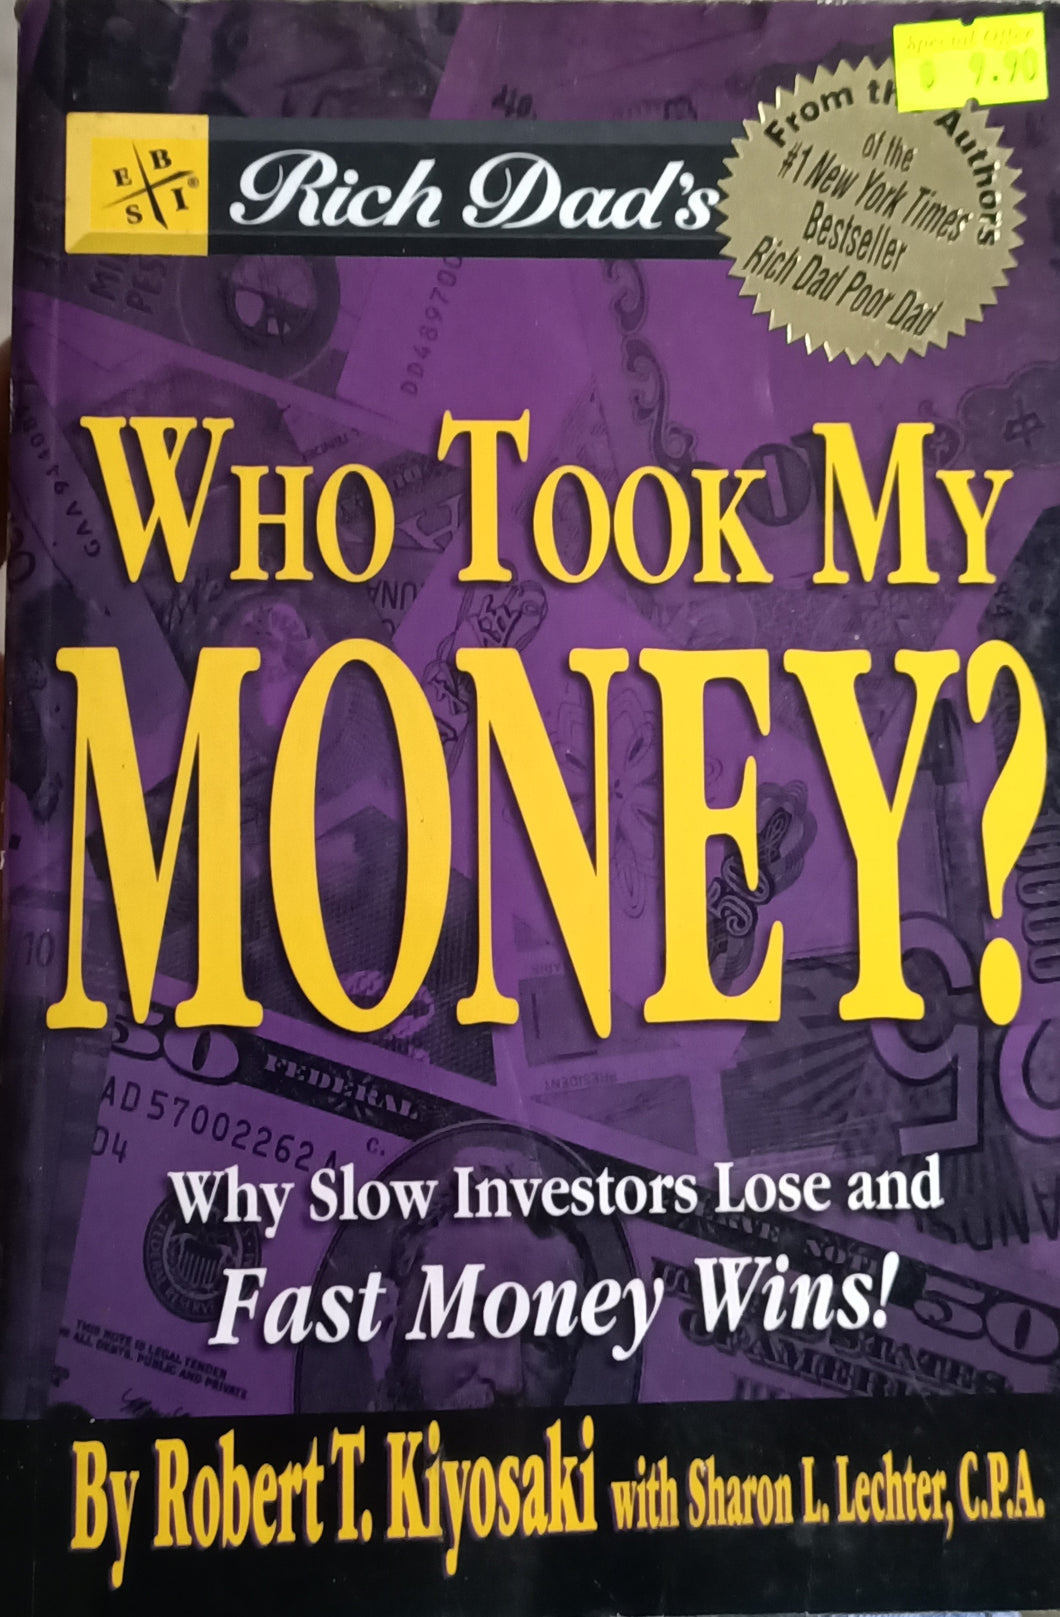 Rich Dad's: Who Took My Money? - Robert T. Kiyosaki with Sharon L. Lector, C.P.A